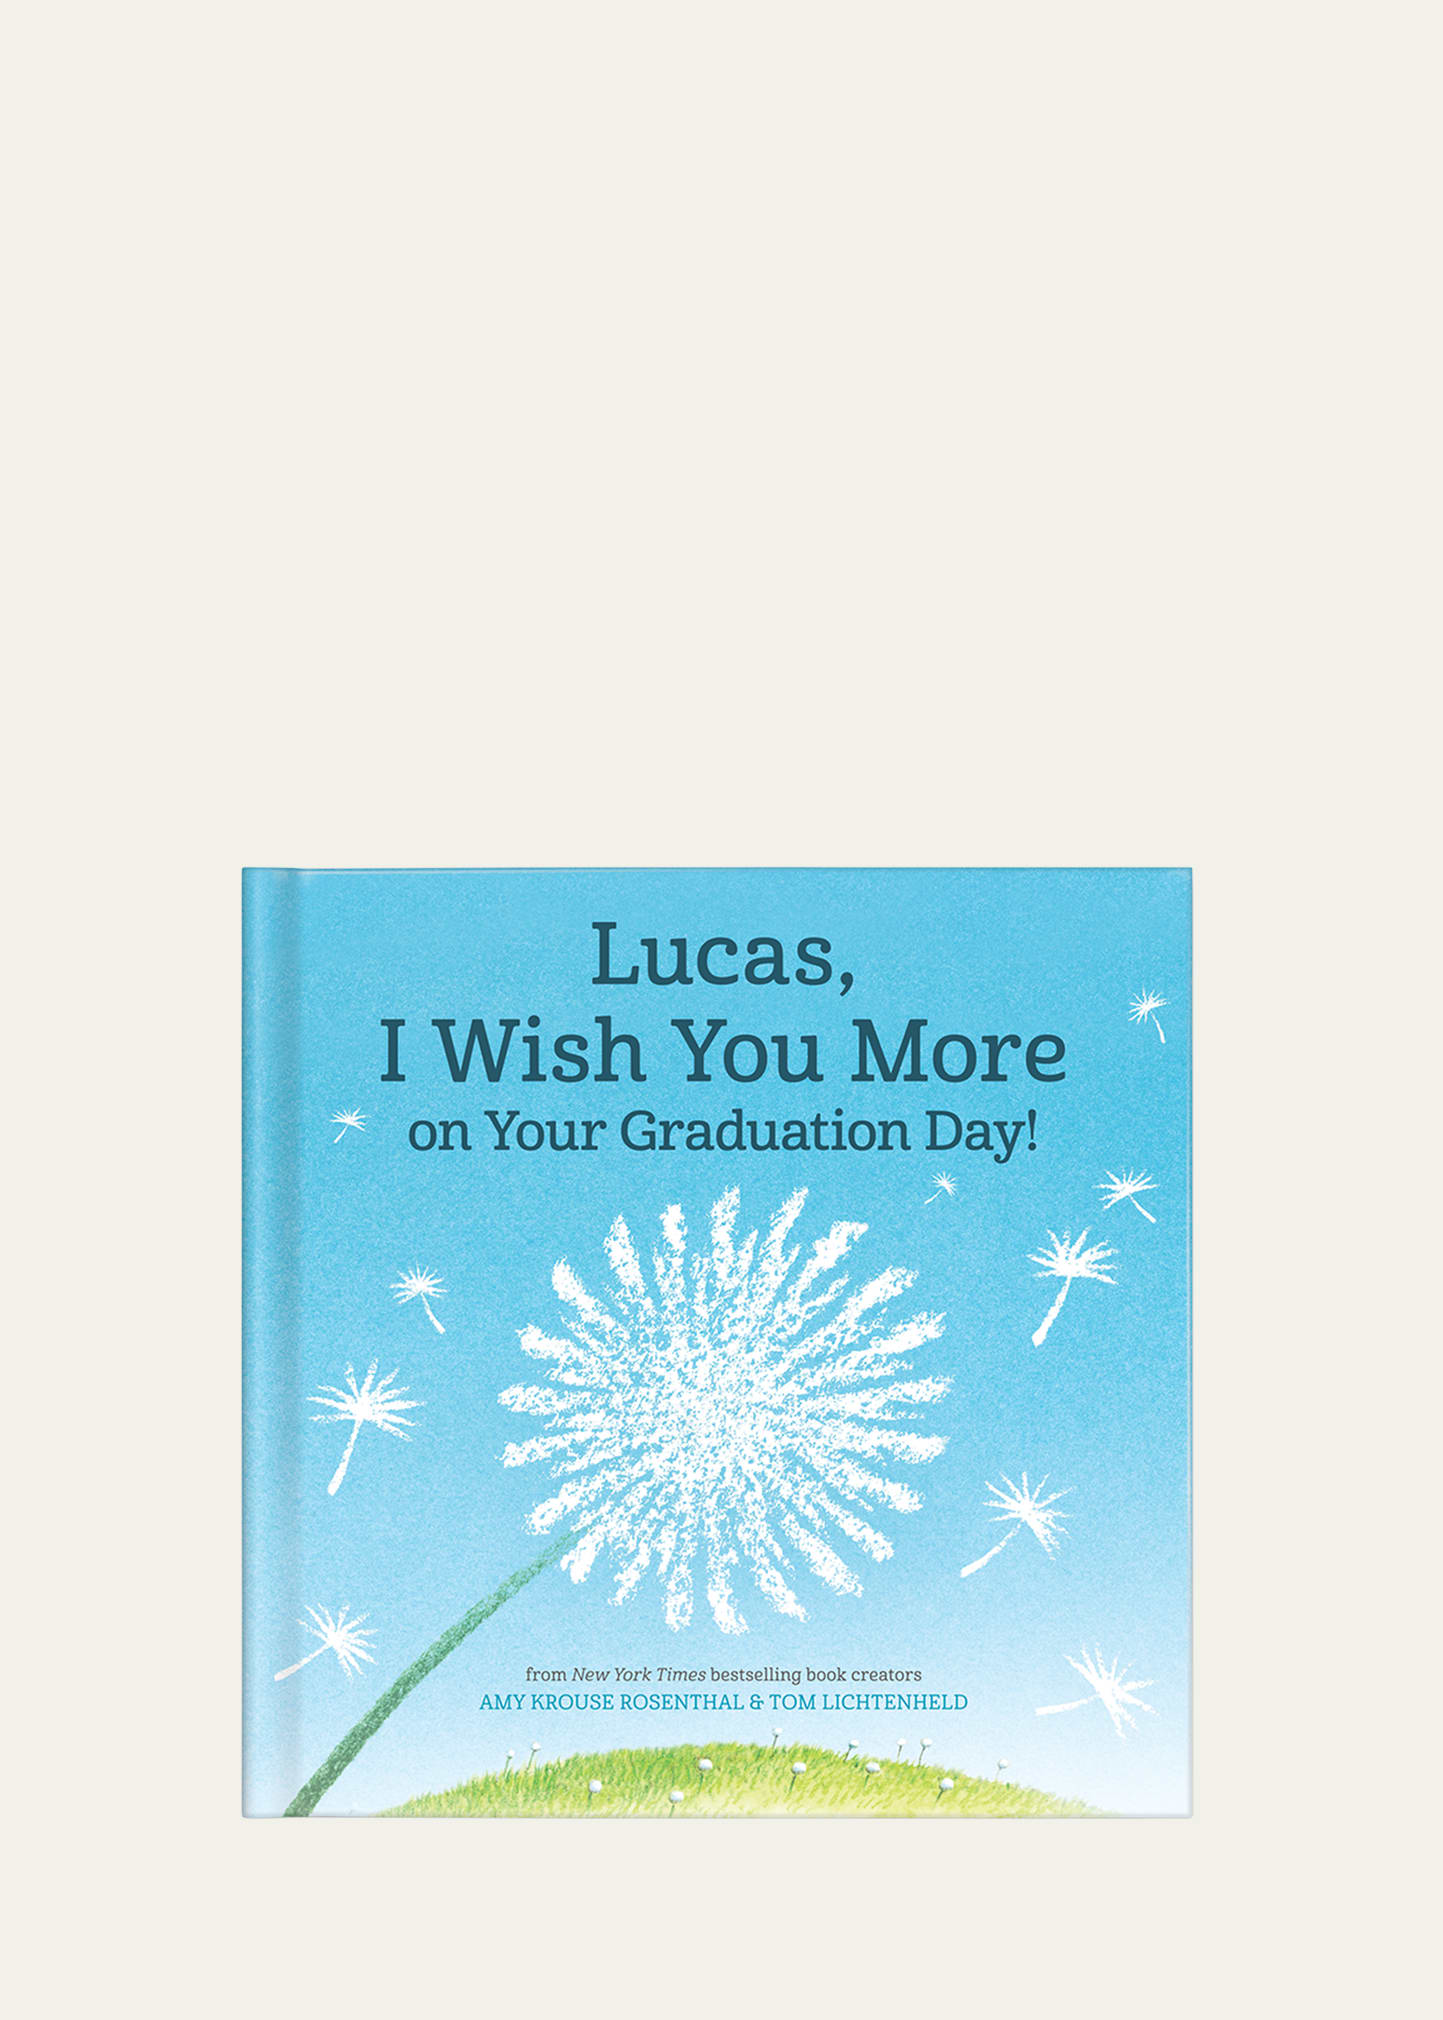 I See Me I Wish You More on Graduation Day Book, Personalized